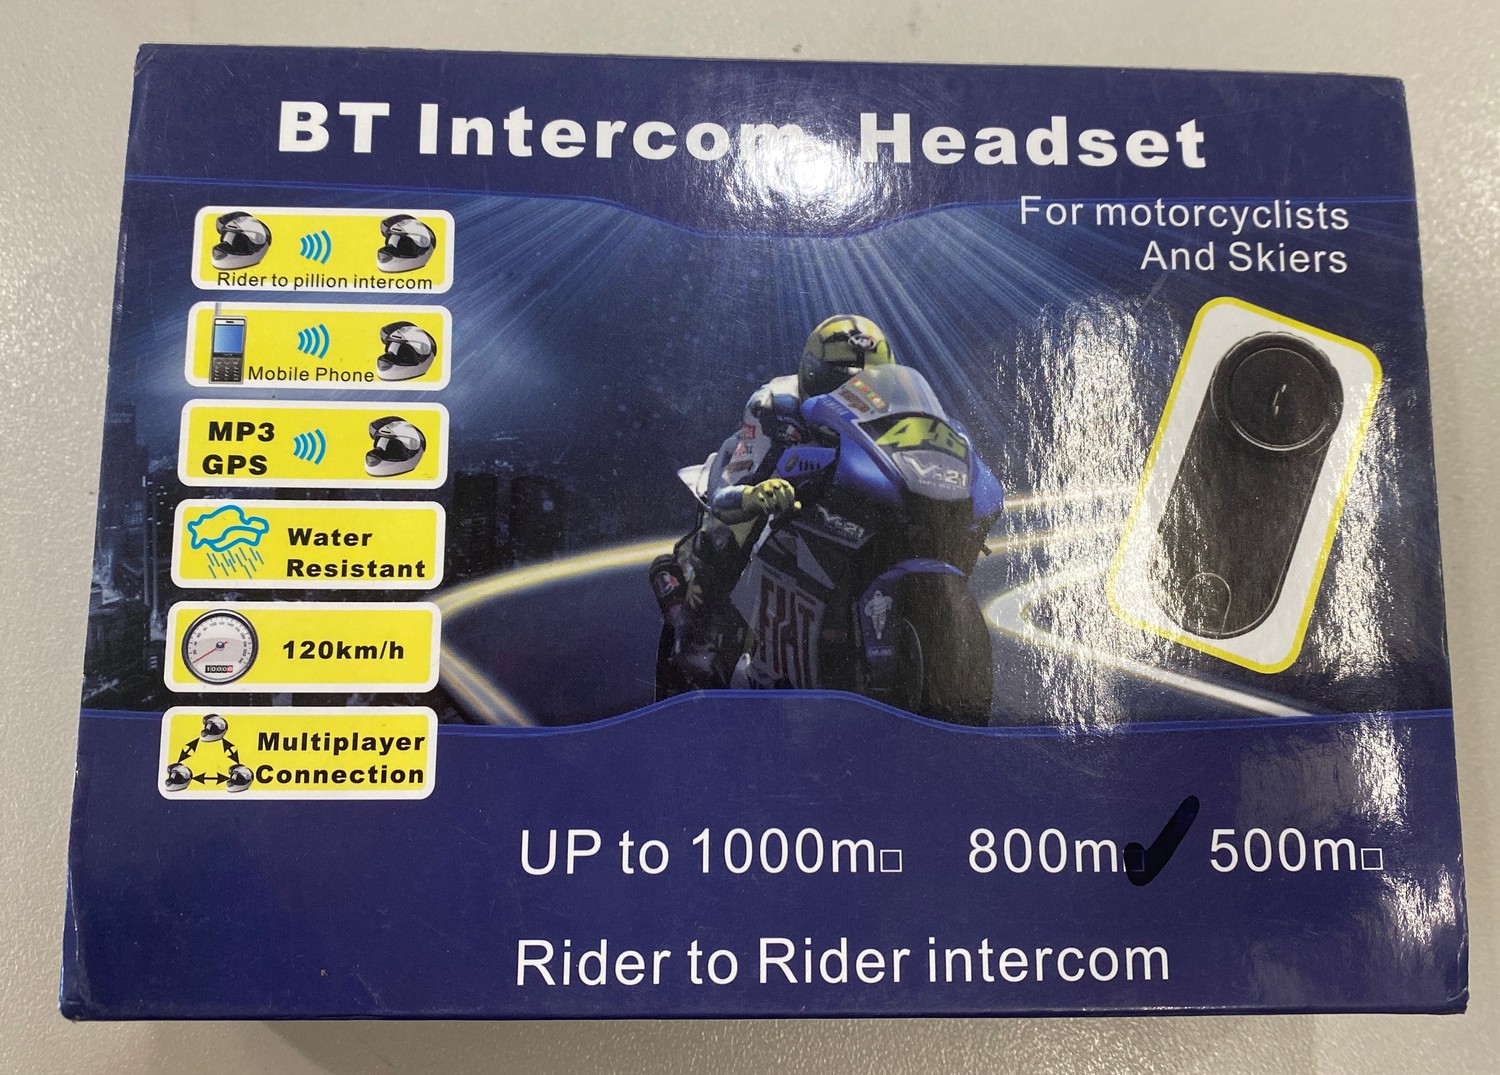 Pair BT Intercom headset 800m rider to rider intercom for motorcyclists and skiers, new in boxes - Image 2 of 2